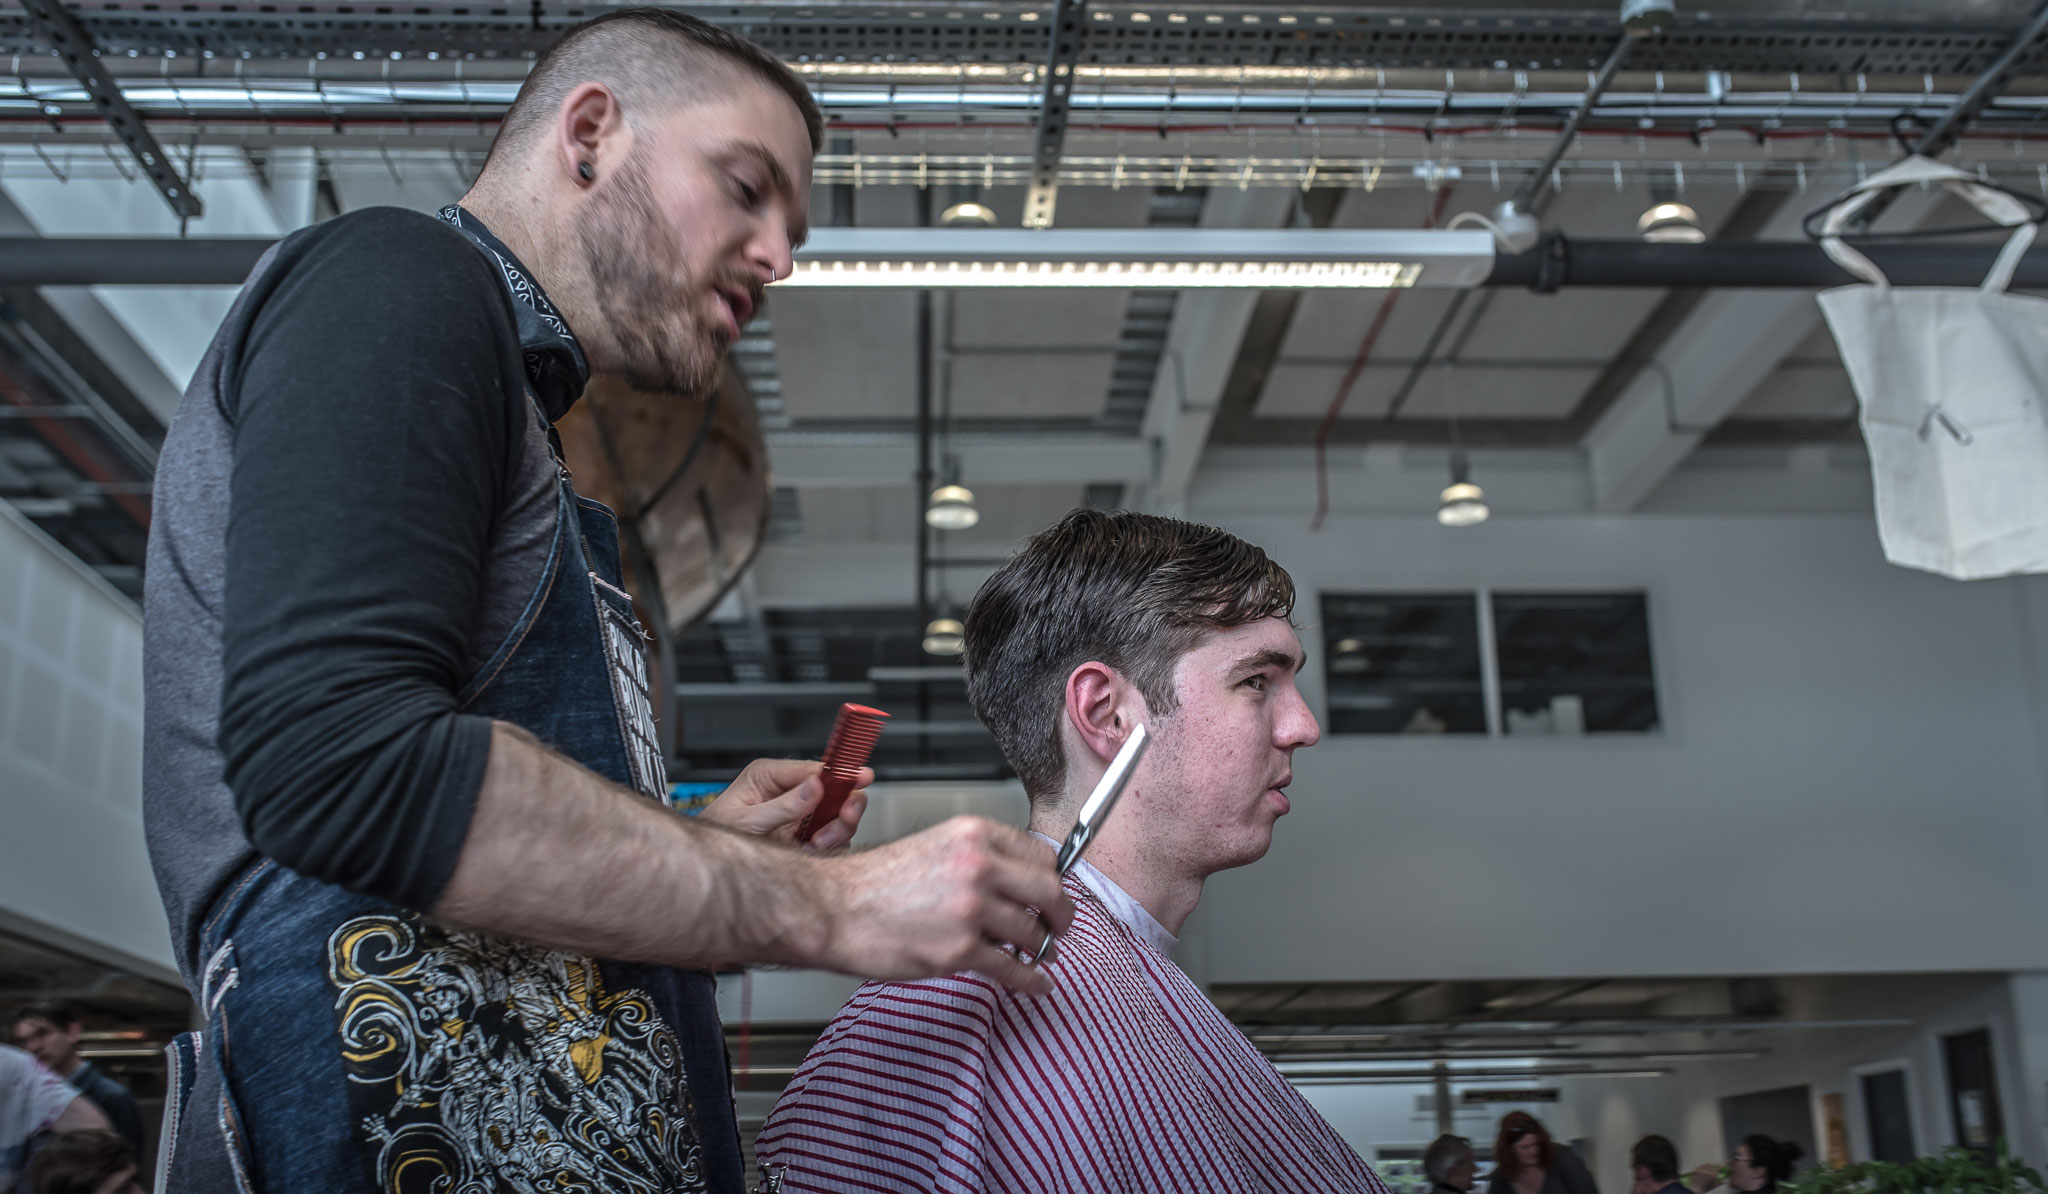 Pop up Barber Cut the Punx with scissorsr and customer